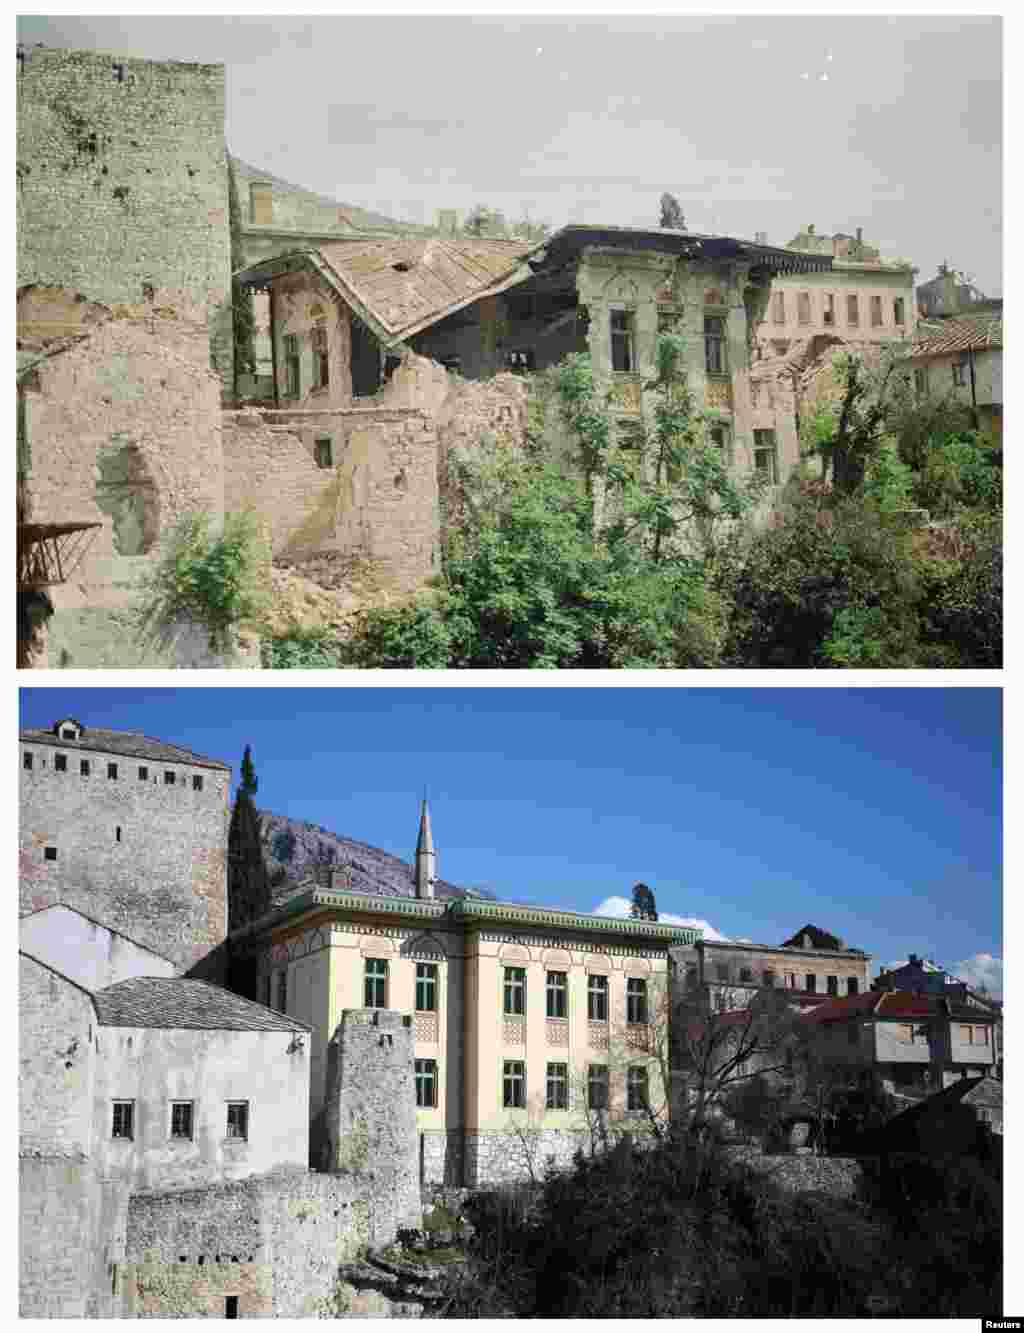 Damaged buildings in June 1993, and the same location in 2013